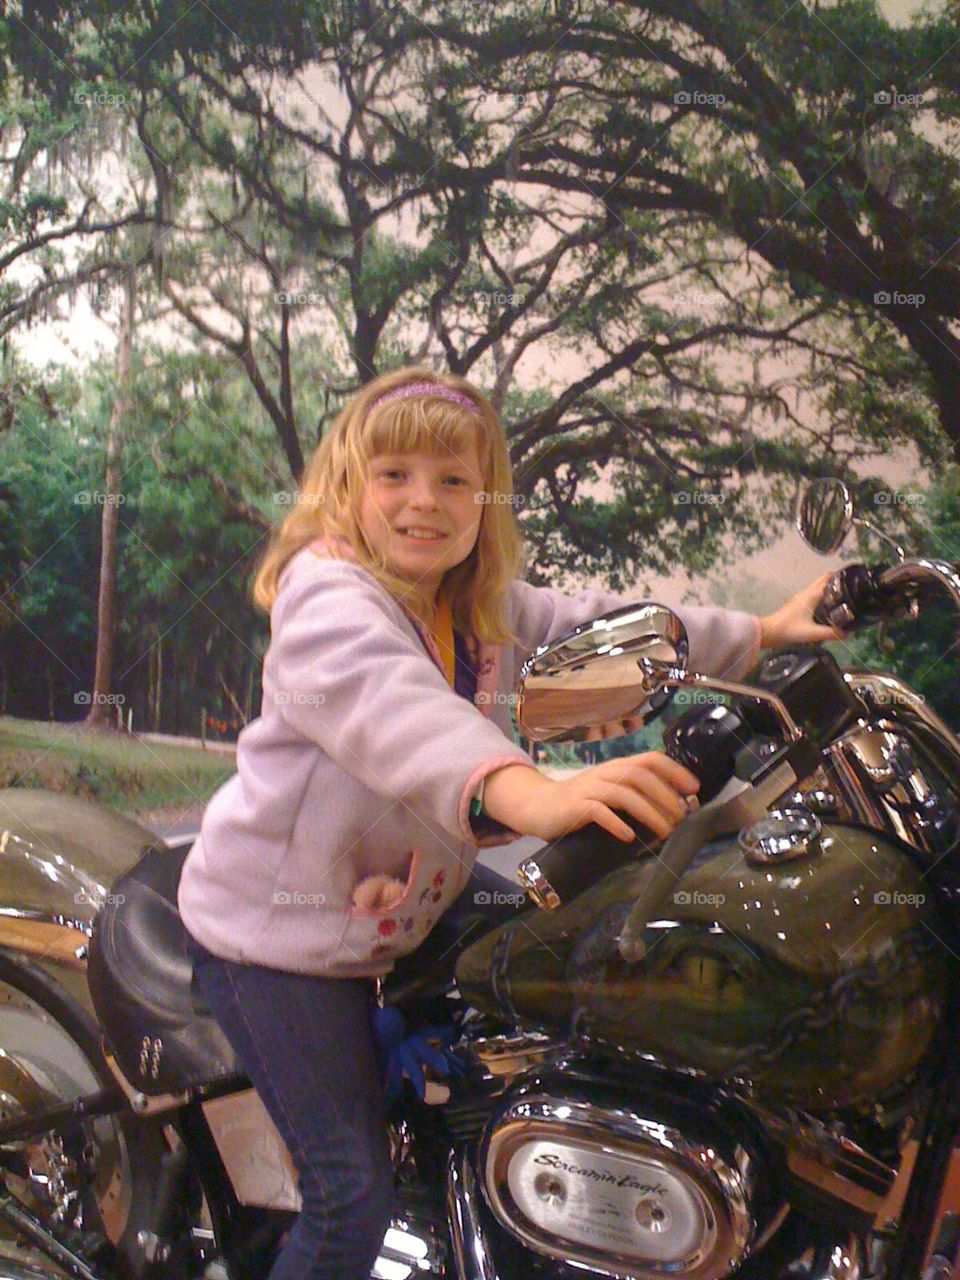 She’s loving the chance to sit on a Harley in the Orlando Airport.